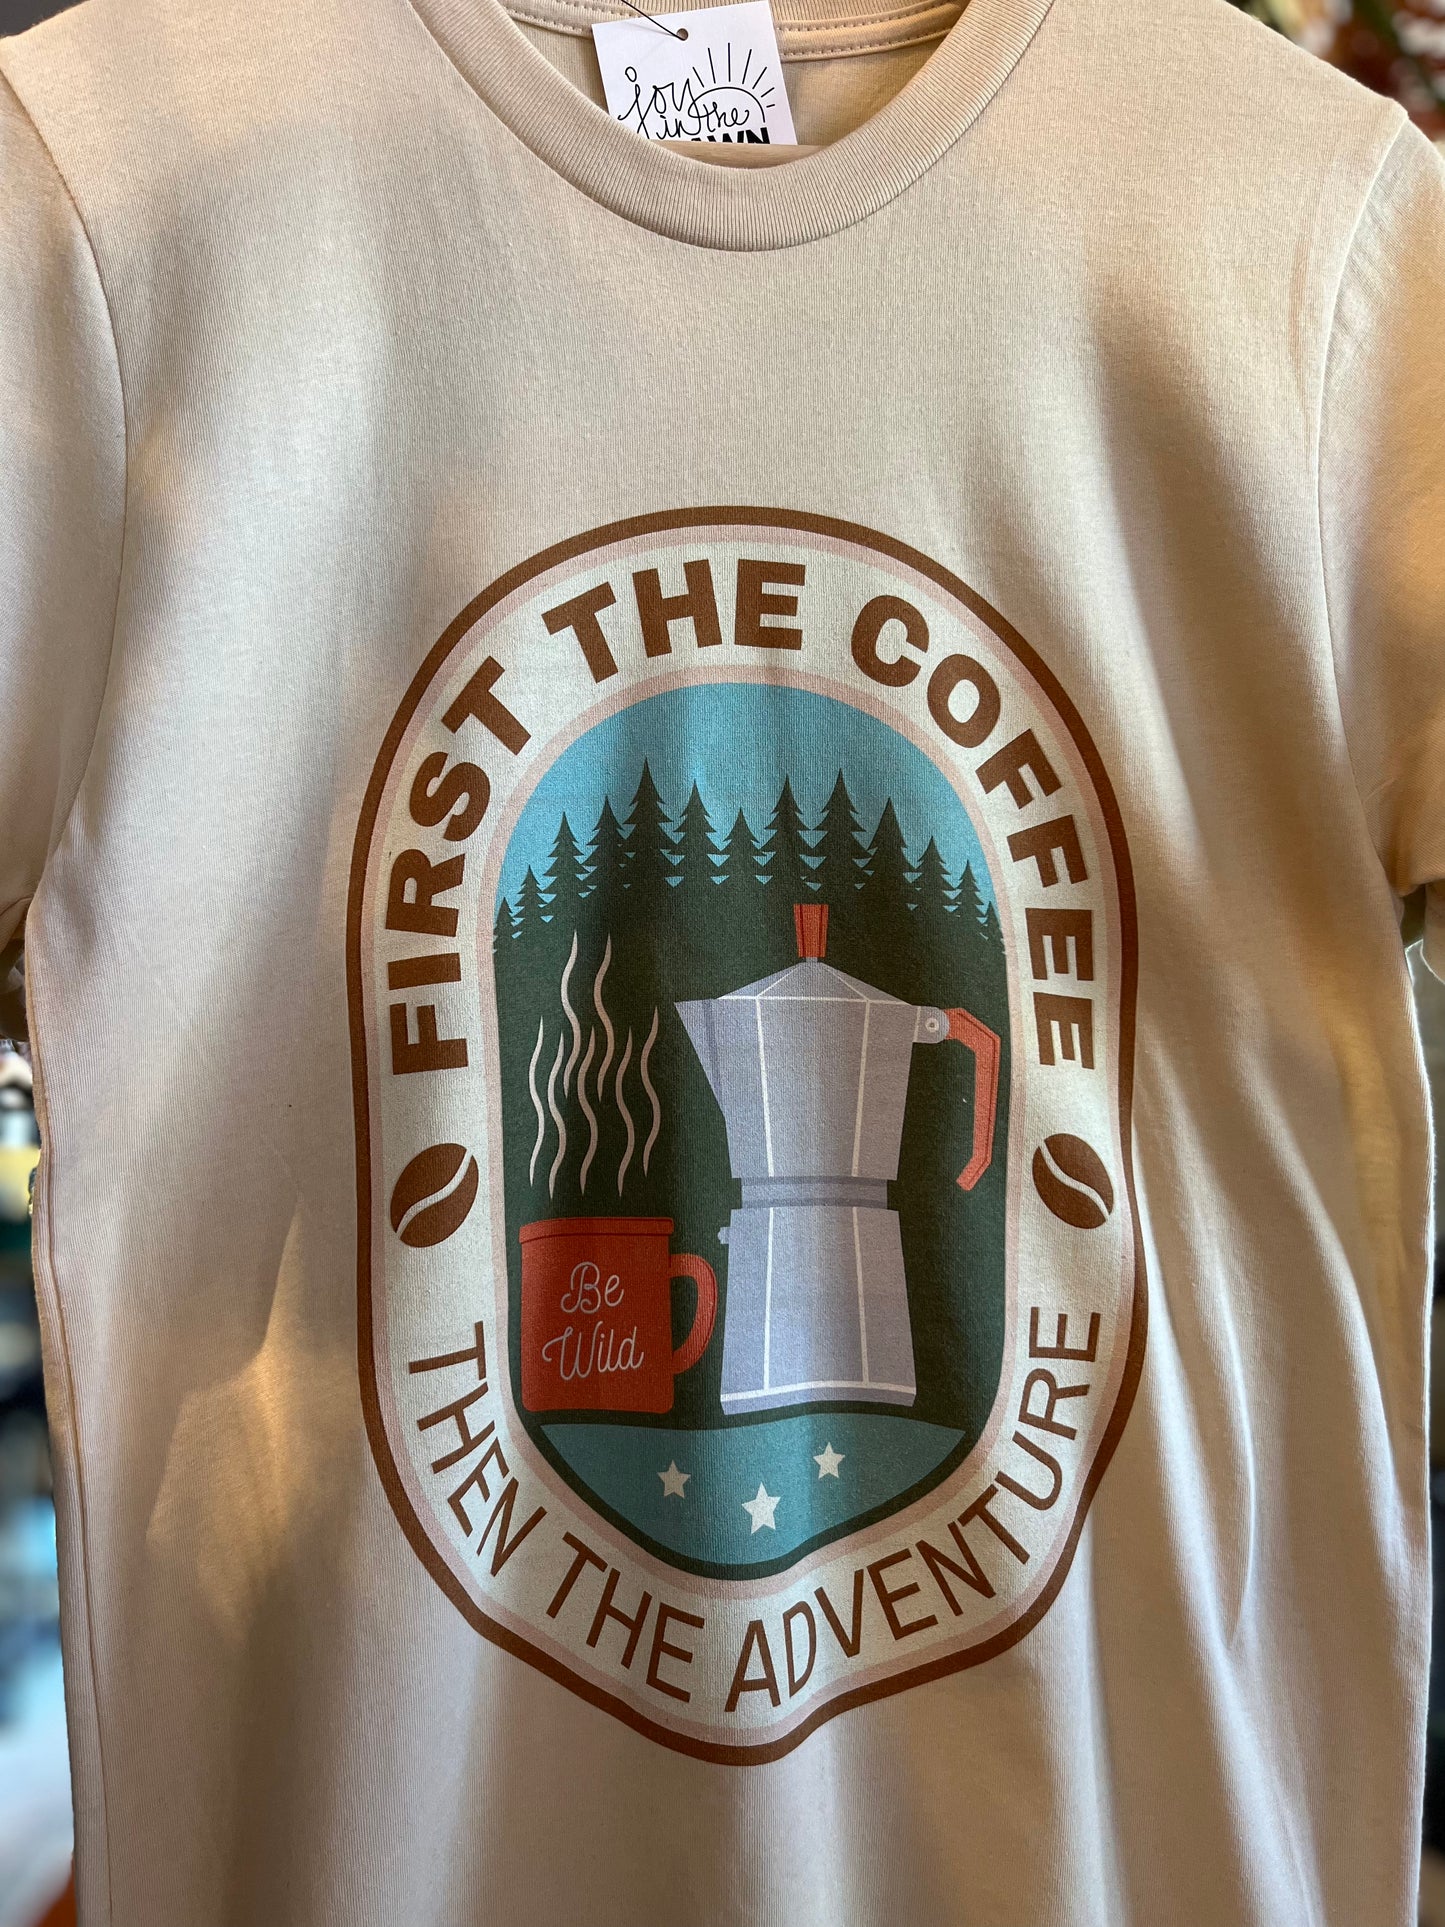 First Coffee, Then Adventure Tee